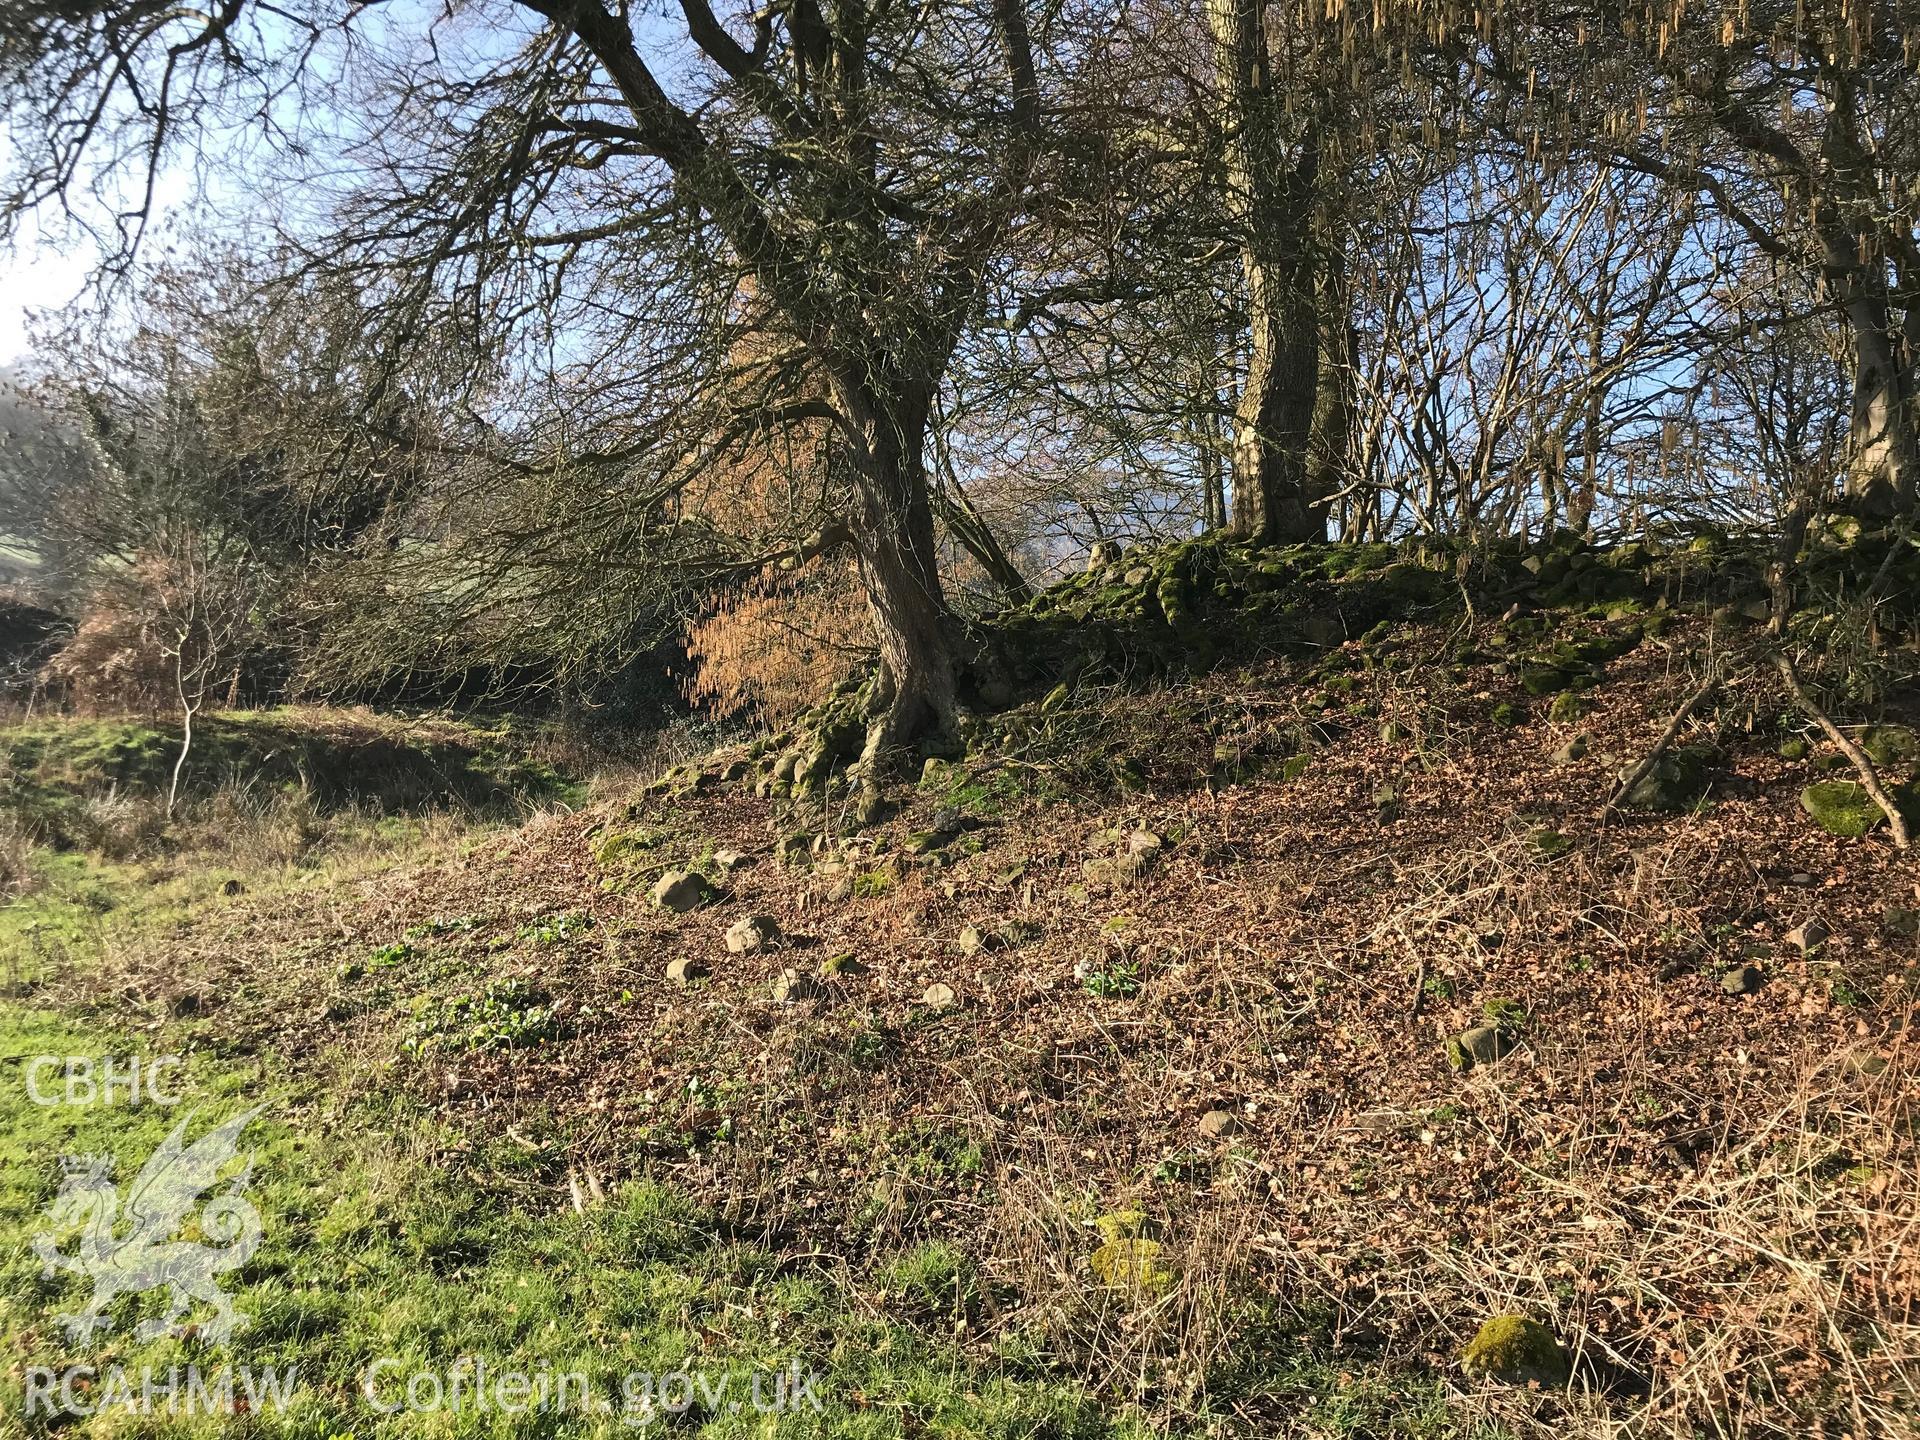 Colour photograph of Hen Castell and surrounding moat, Llangattock, Abergavenny, taken by Paul R. Davis on 24th February 2019.